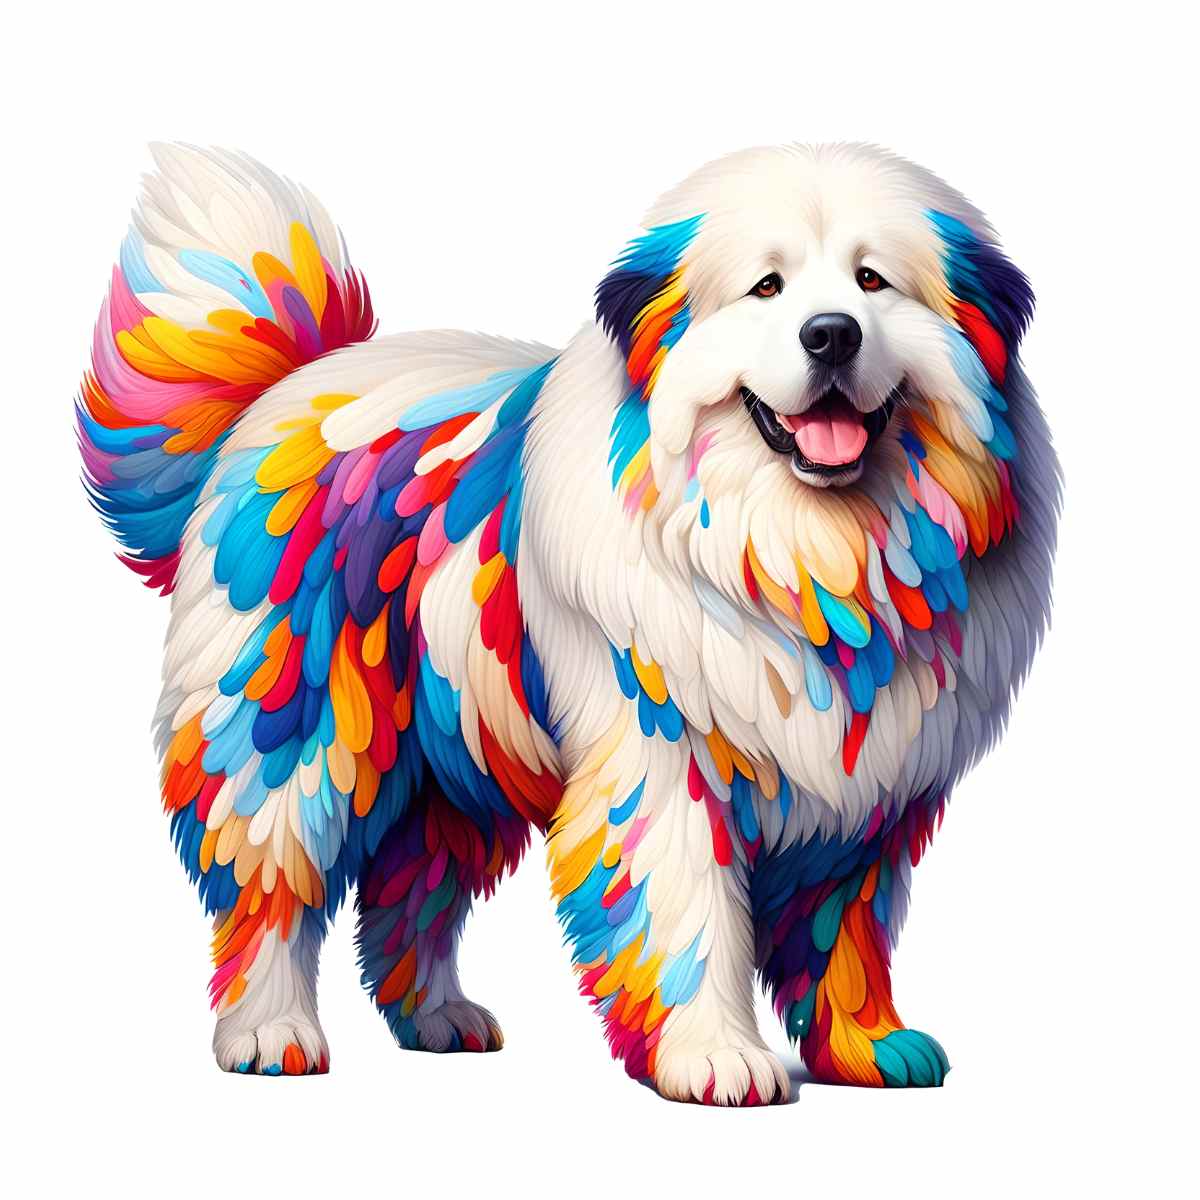 Animal Jigsaw Puzzle > Wooden Jigsaw Puzzle > Jigsaw Puzzle A4 Great Pyrenees Dog - Jigsaw Puzzle